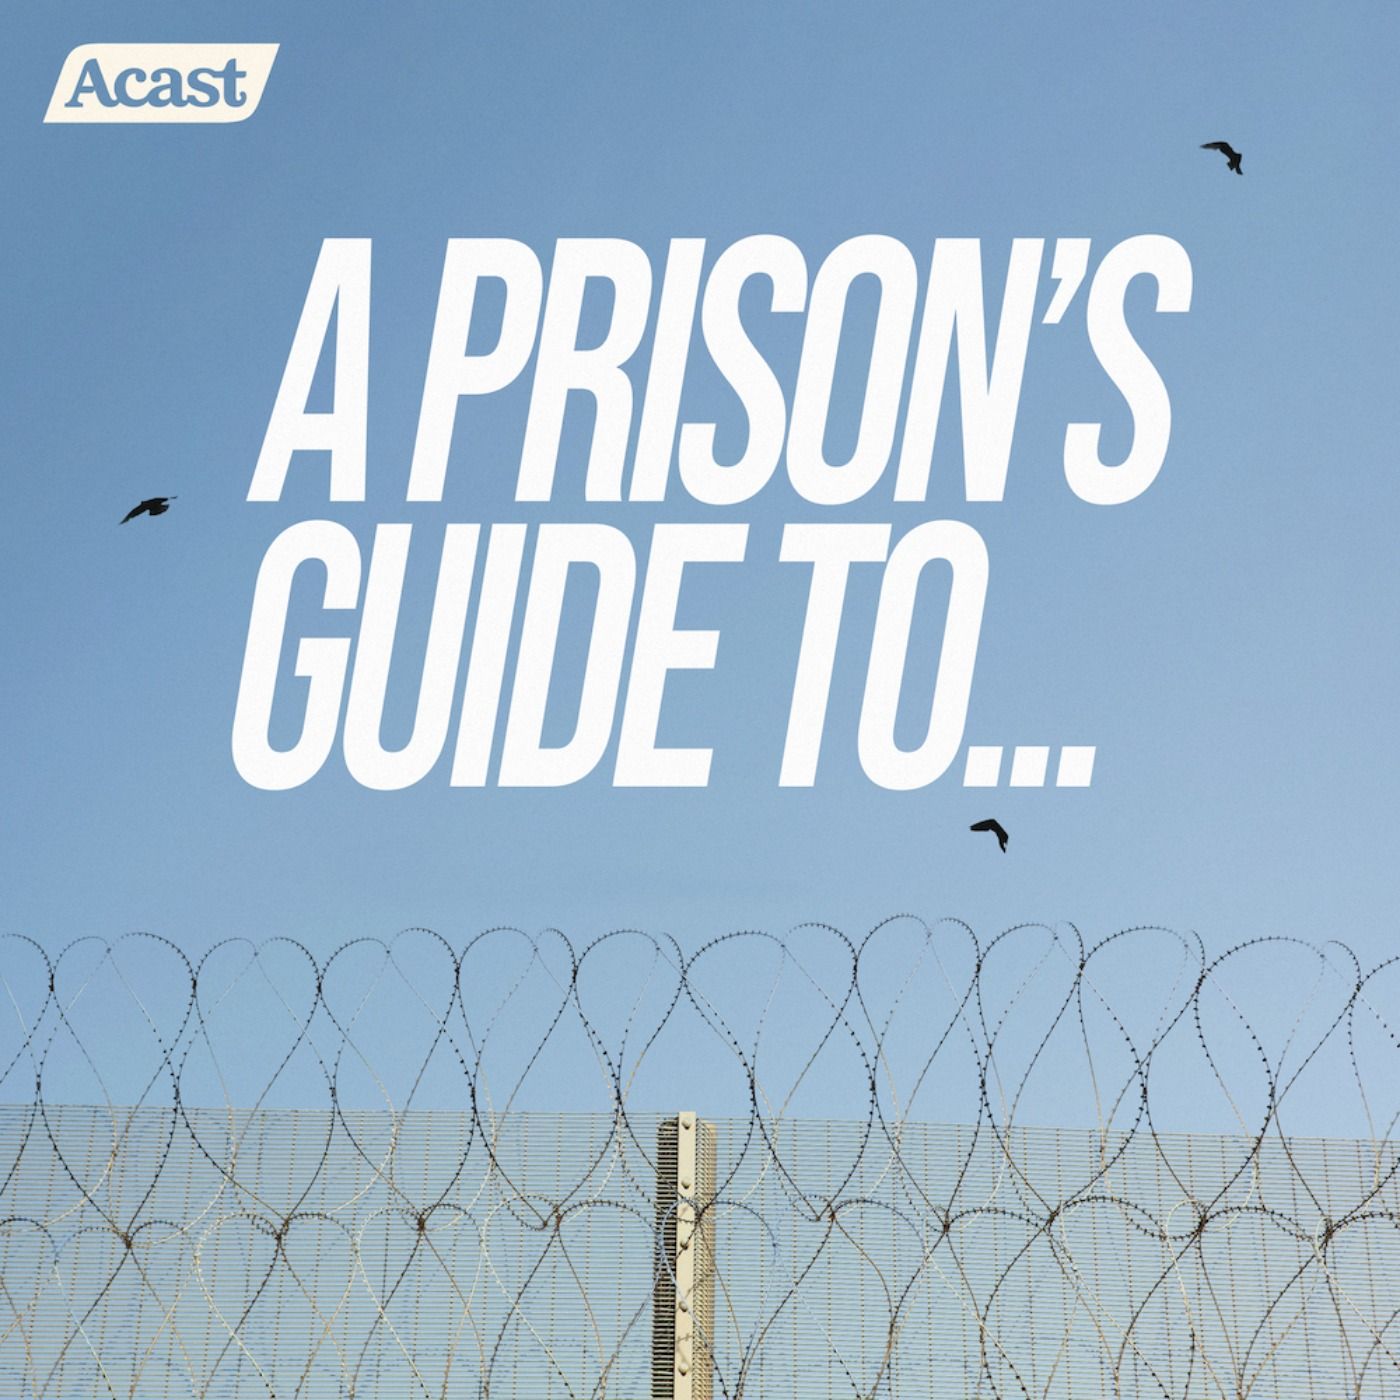 A Prison's Guide To...Podcast